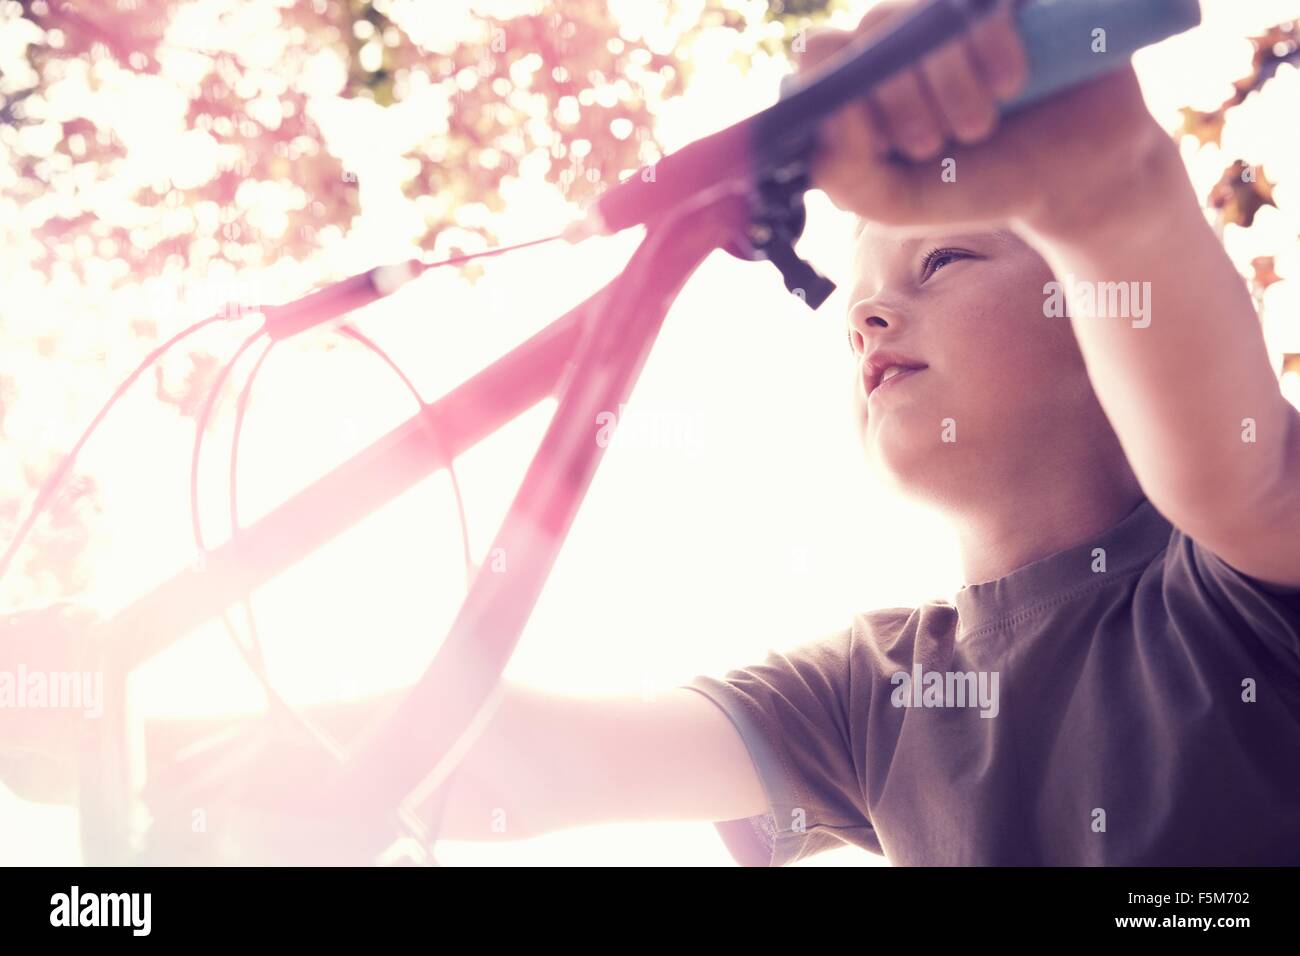 Low angle view of boy on BMX bicycle looking away Stock Photo